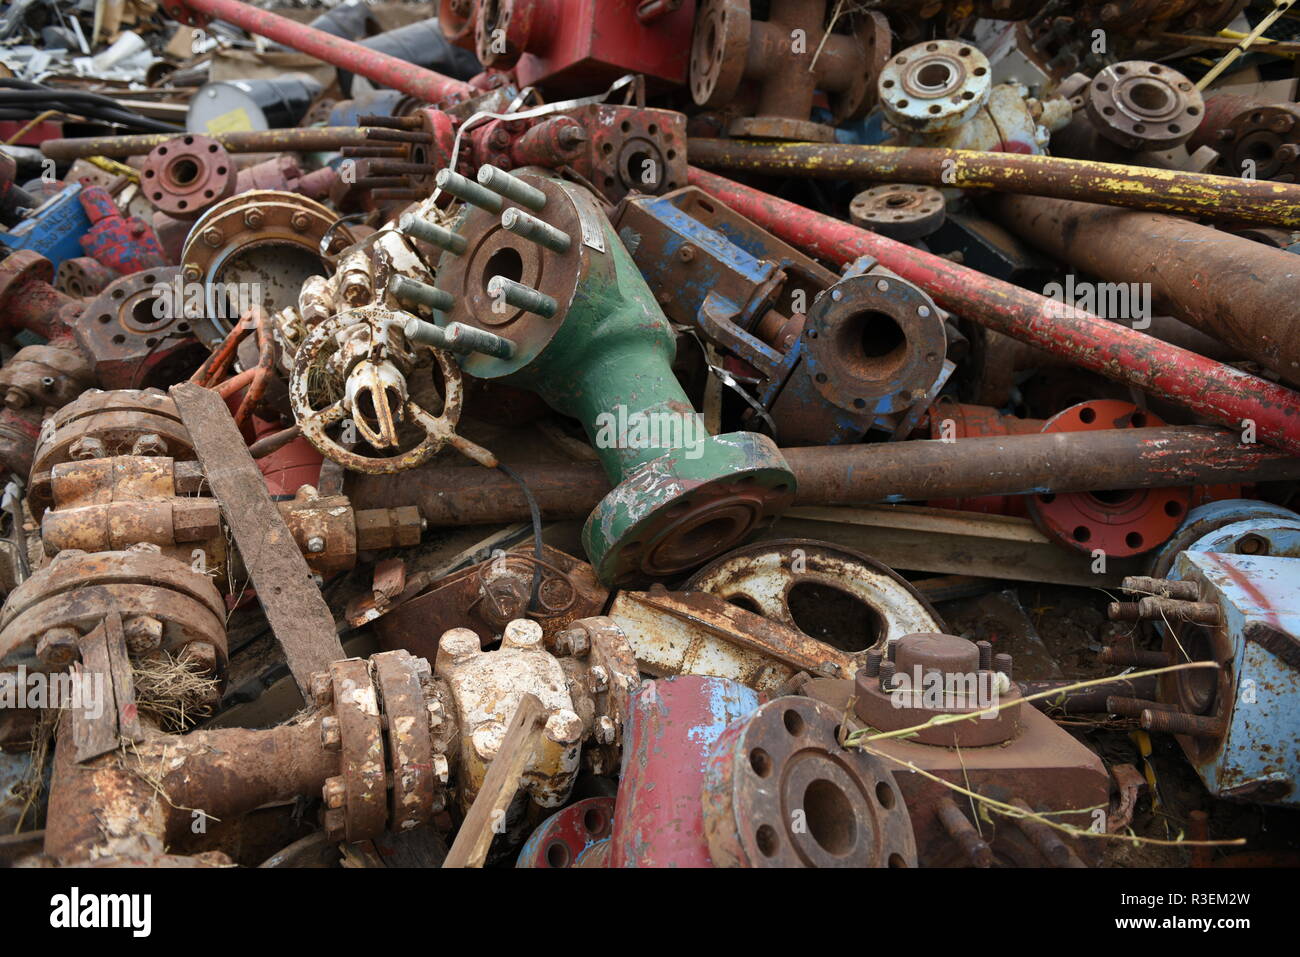 Large colorful pile of discarded industrial scrap iron for scrap metal recycling in the USA Stock Photo